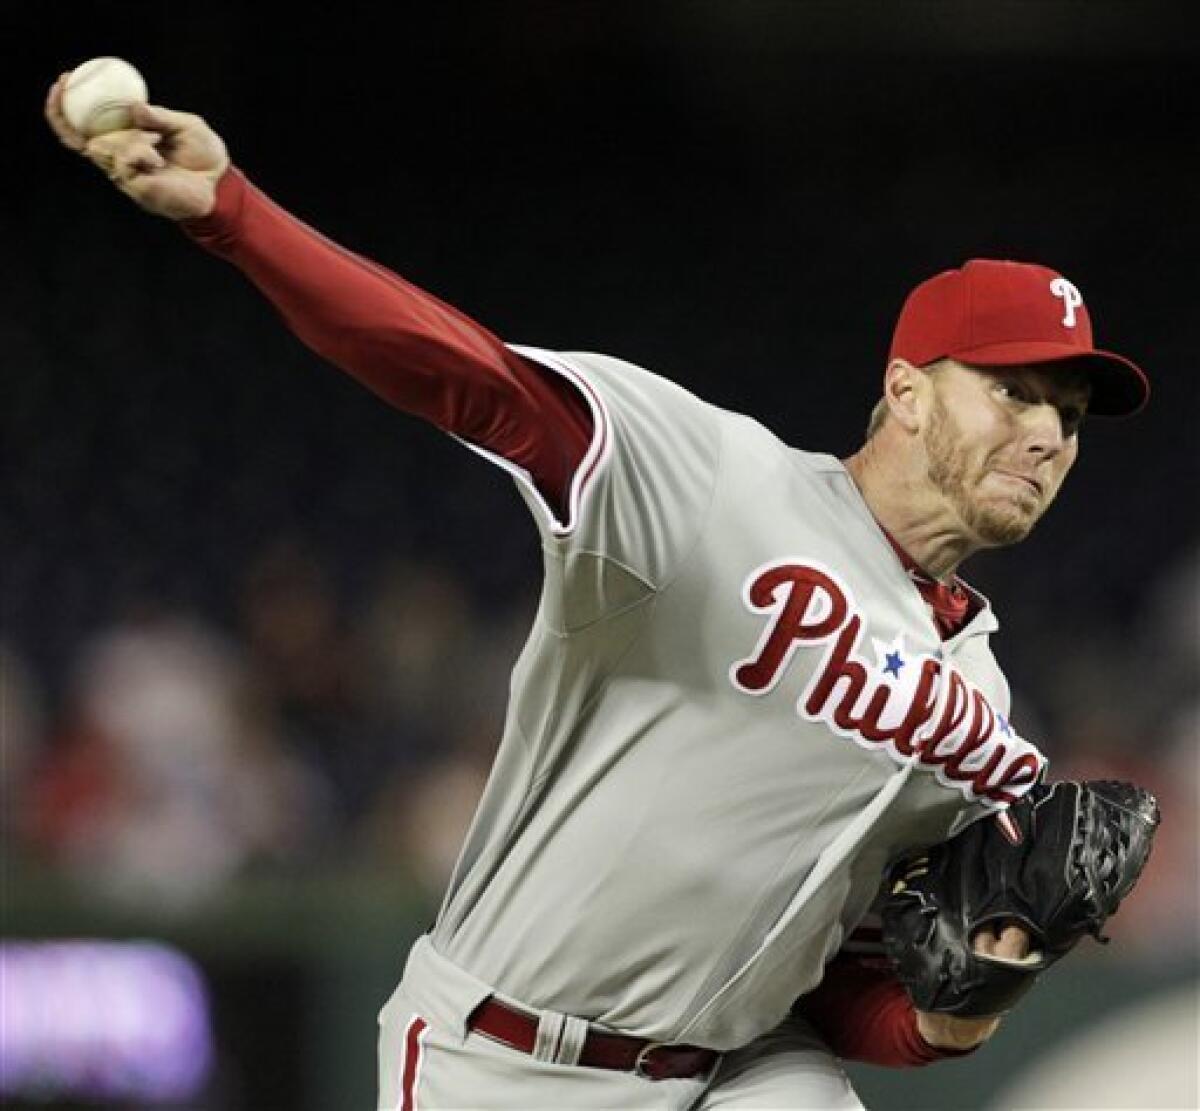 13 years ago, Phillies' Roy Halladay pitched 2nd no-hitter in MLB